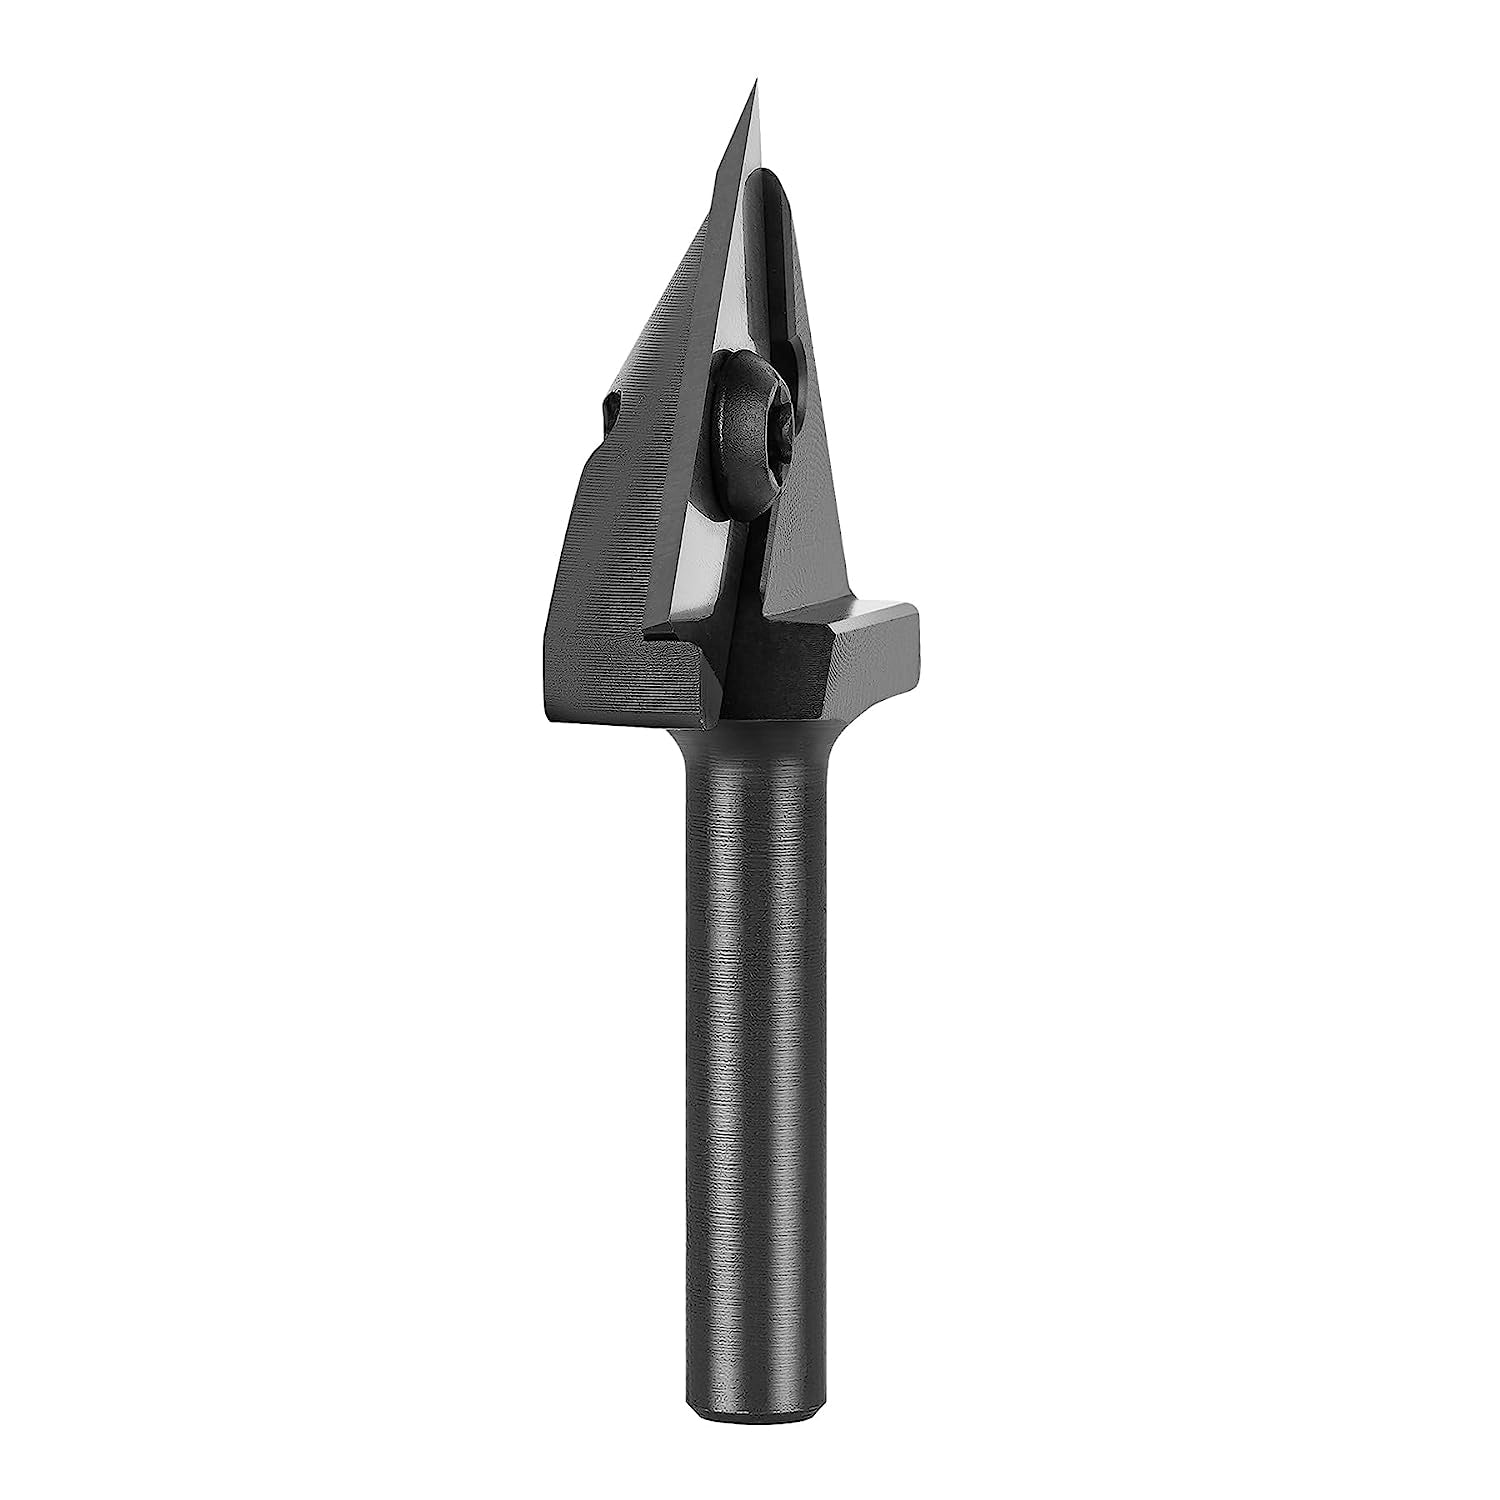 SpeTool 60 Degree V Groove Router Bit With Carbide Insert 1/4 Shank